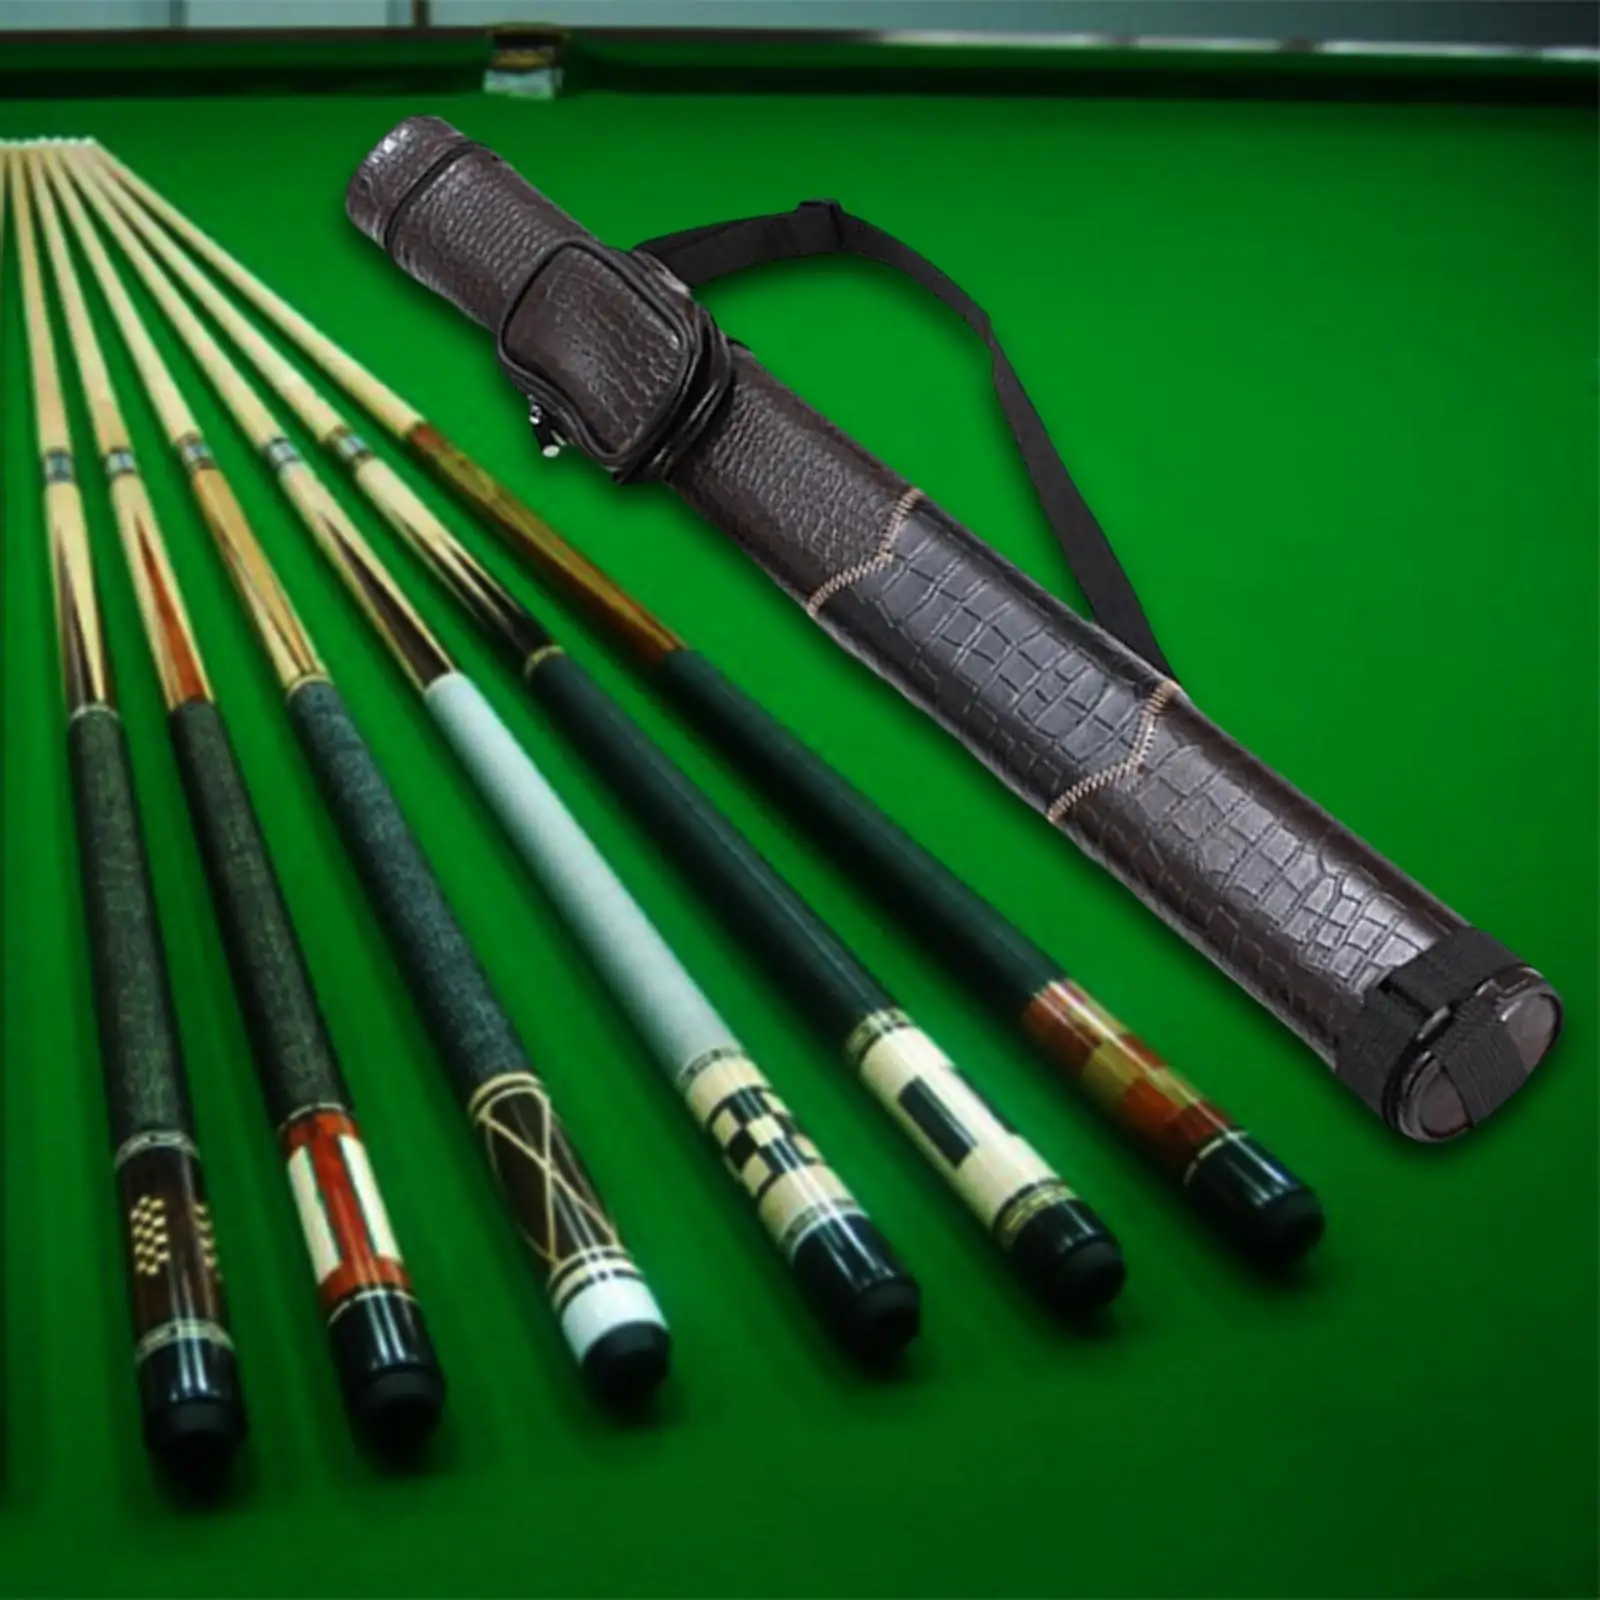 Snooker Cue Storage Pouch Holder Protector Billiard Cue Rod Carrying Case Bag 1/2 Billiard Carrying Cases w/ Adjustable Strap